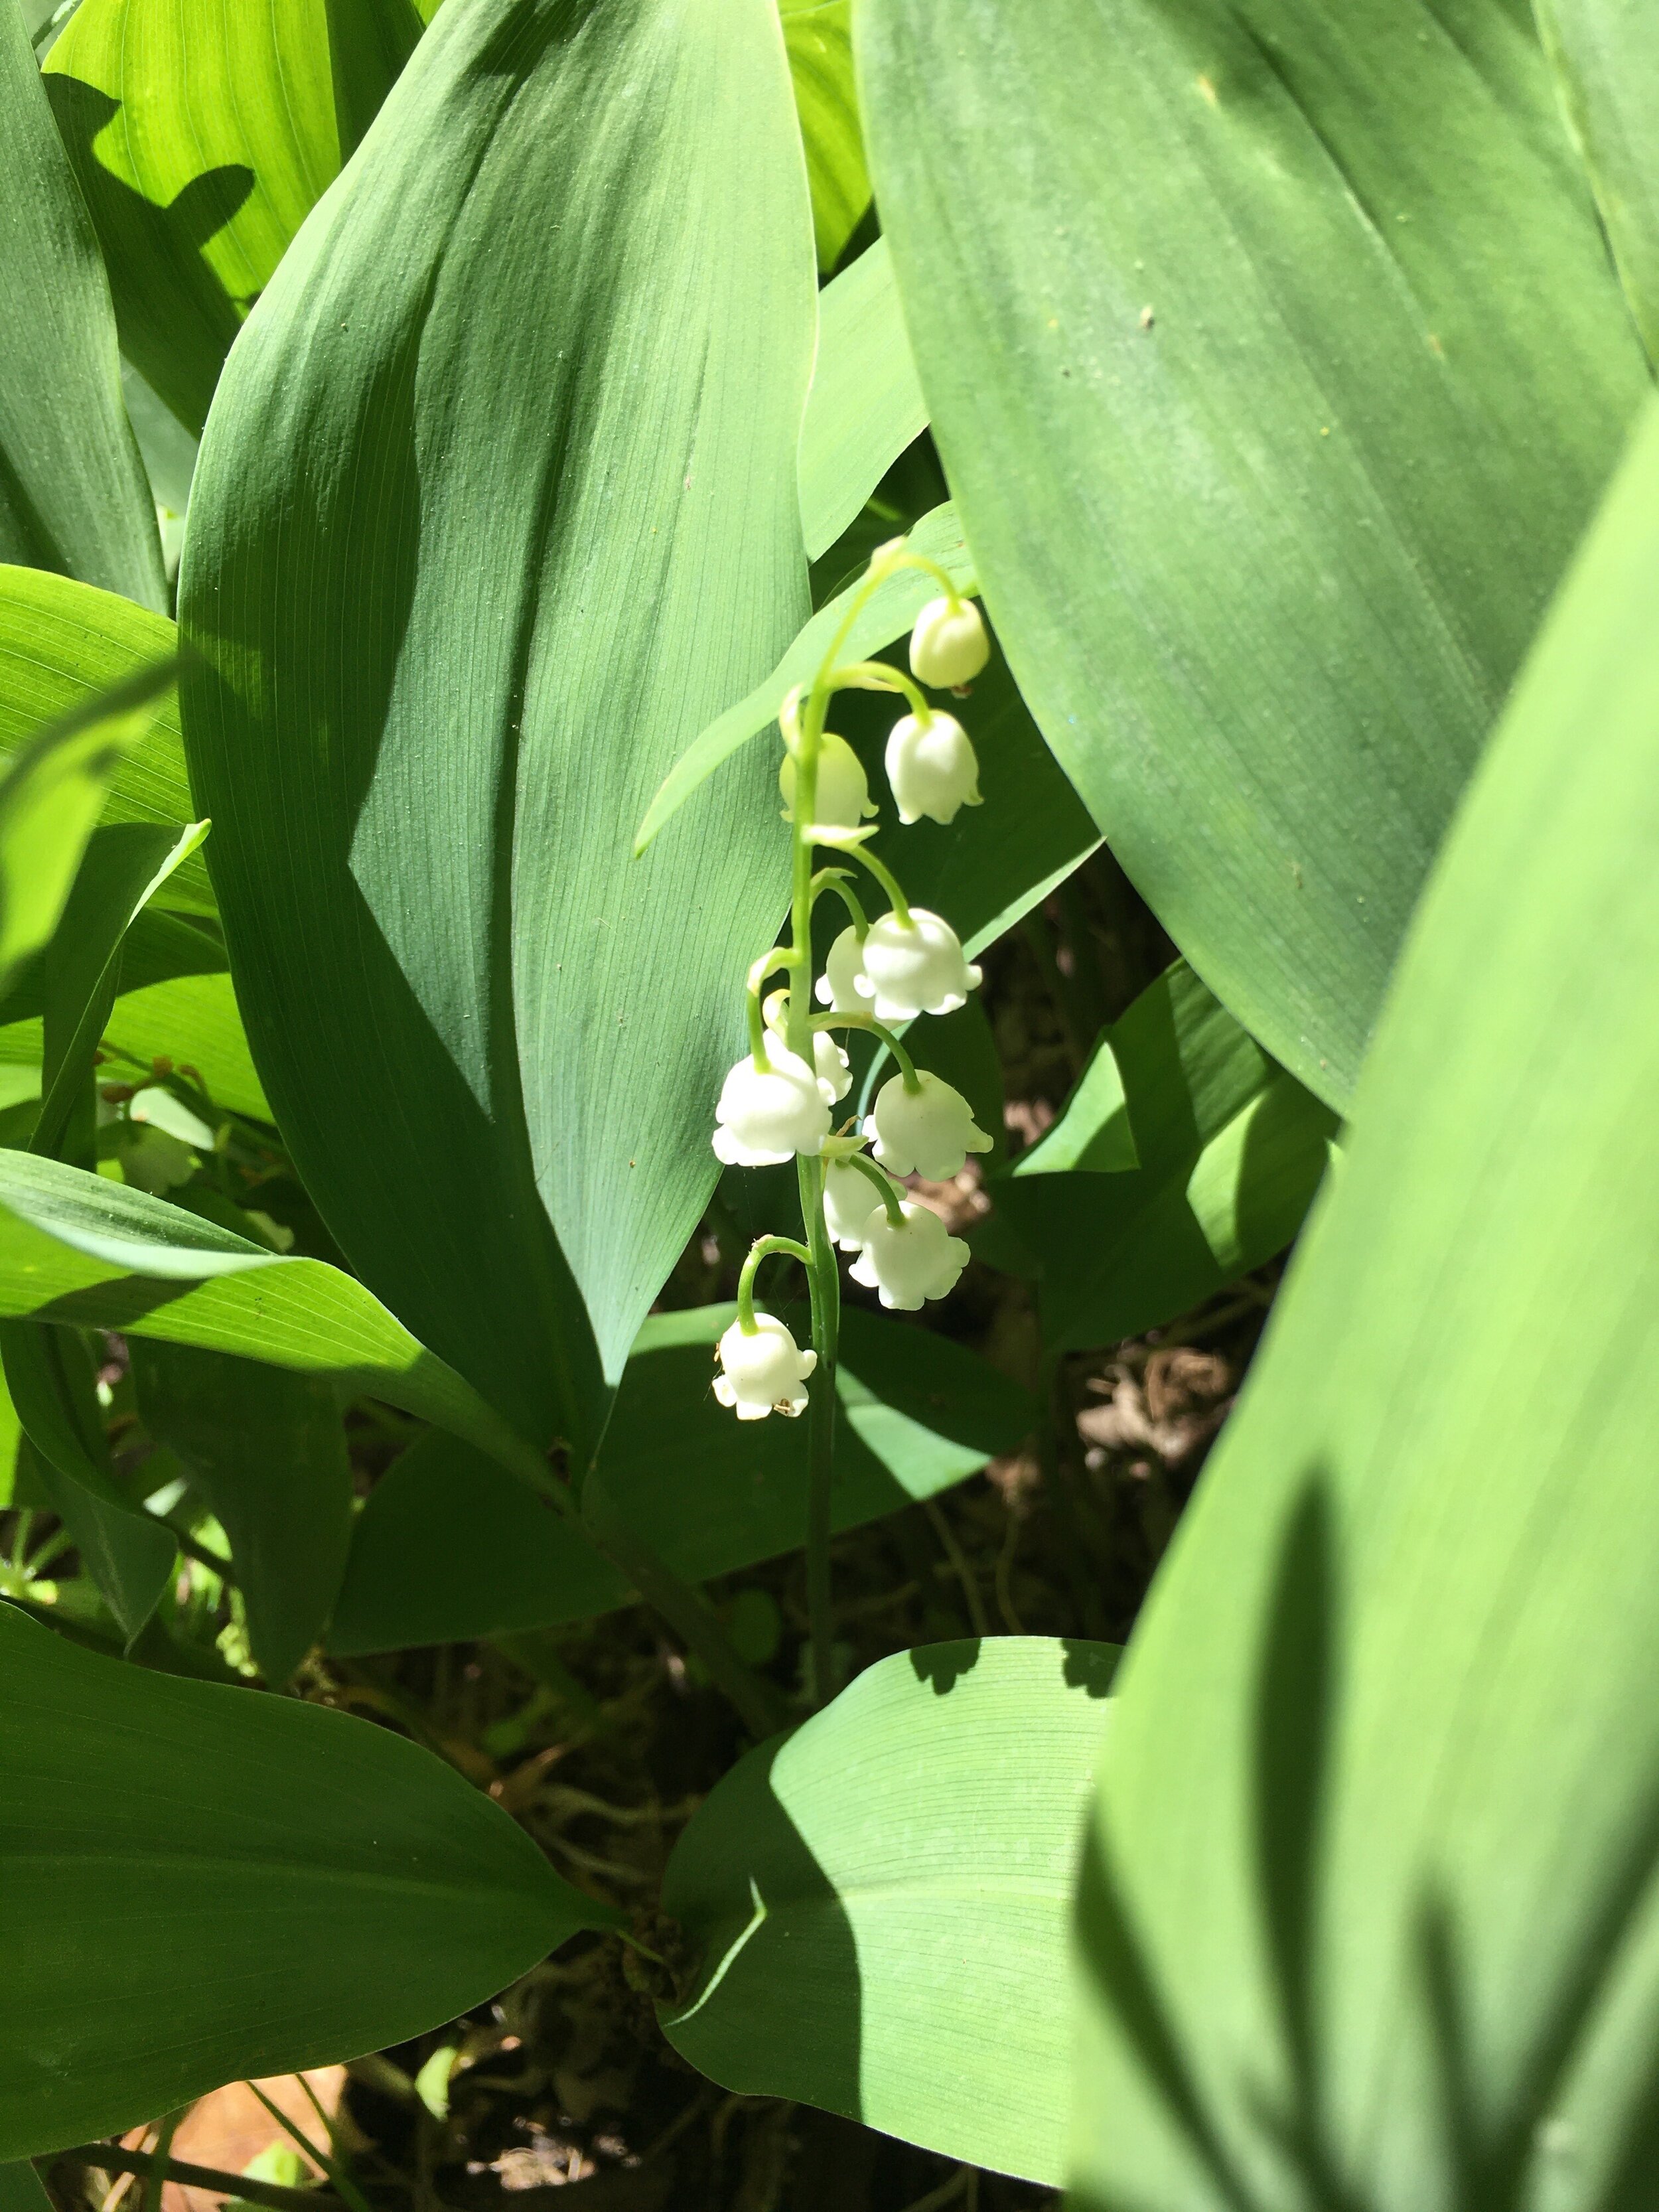 29) Lily of the Valley